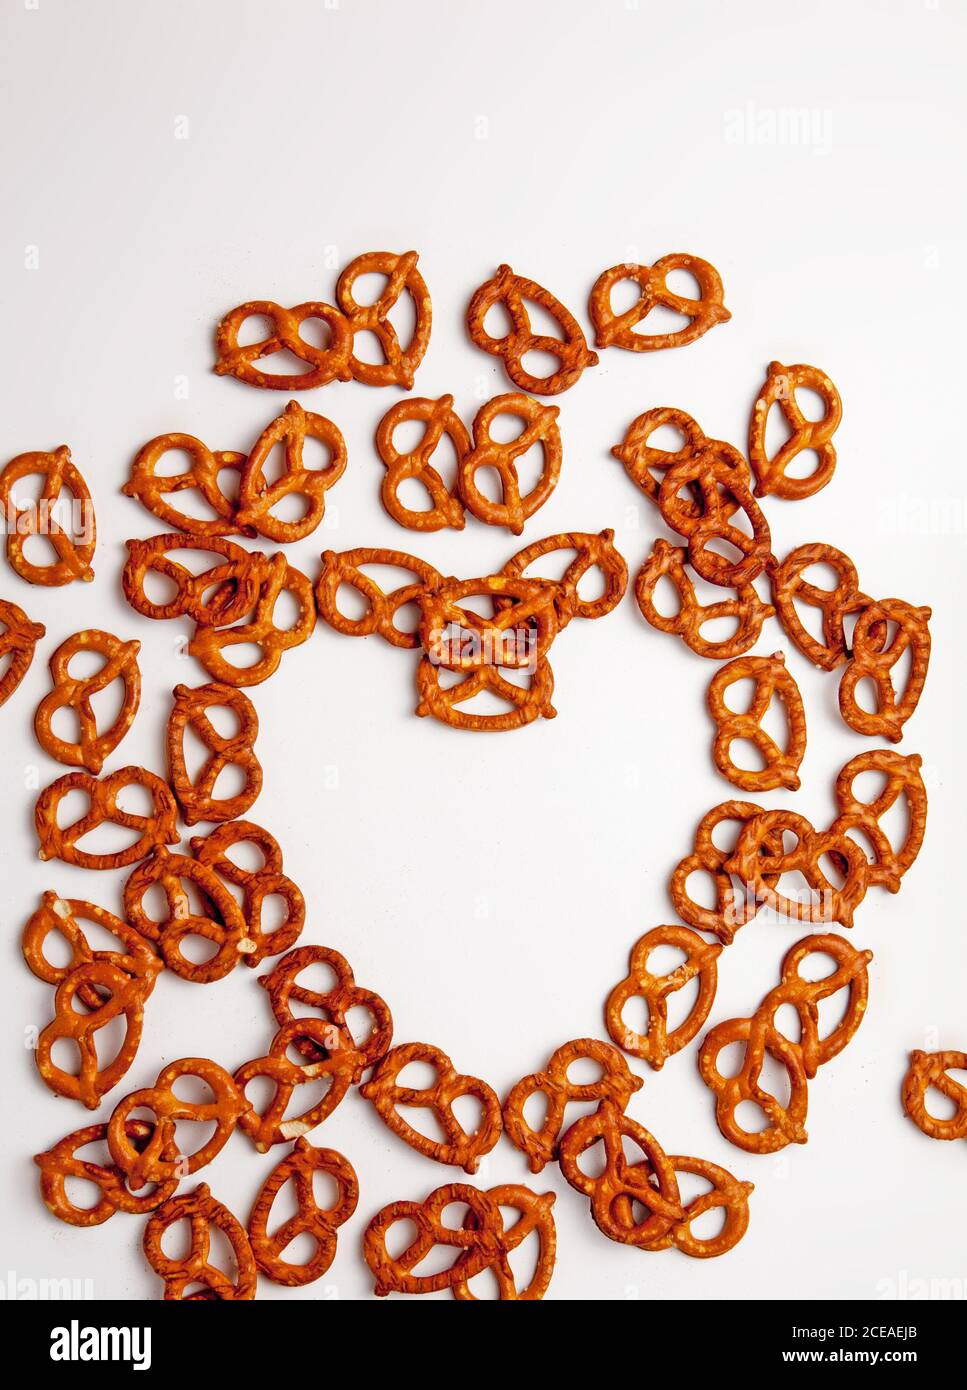 Pretzels in a heart shape on a white background Stock Photo